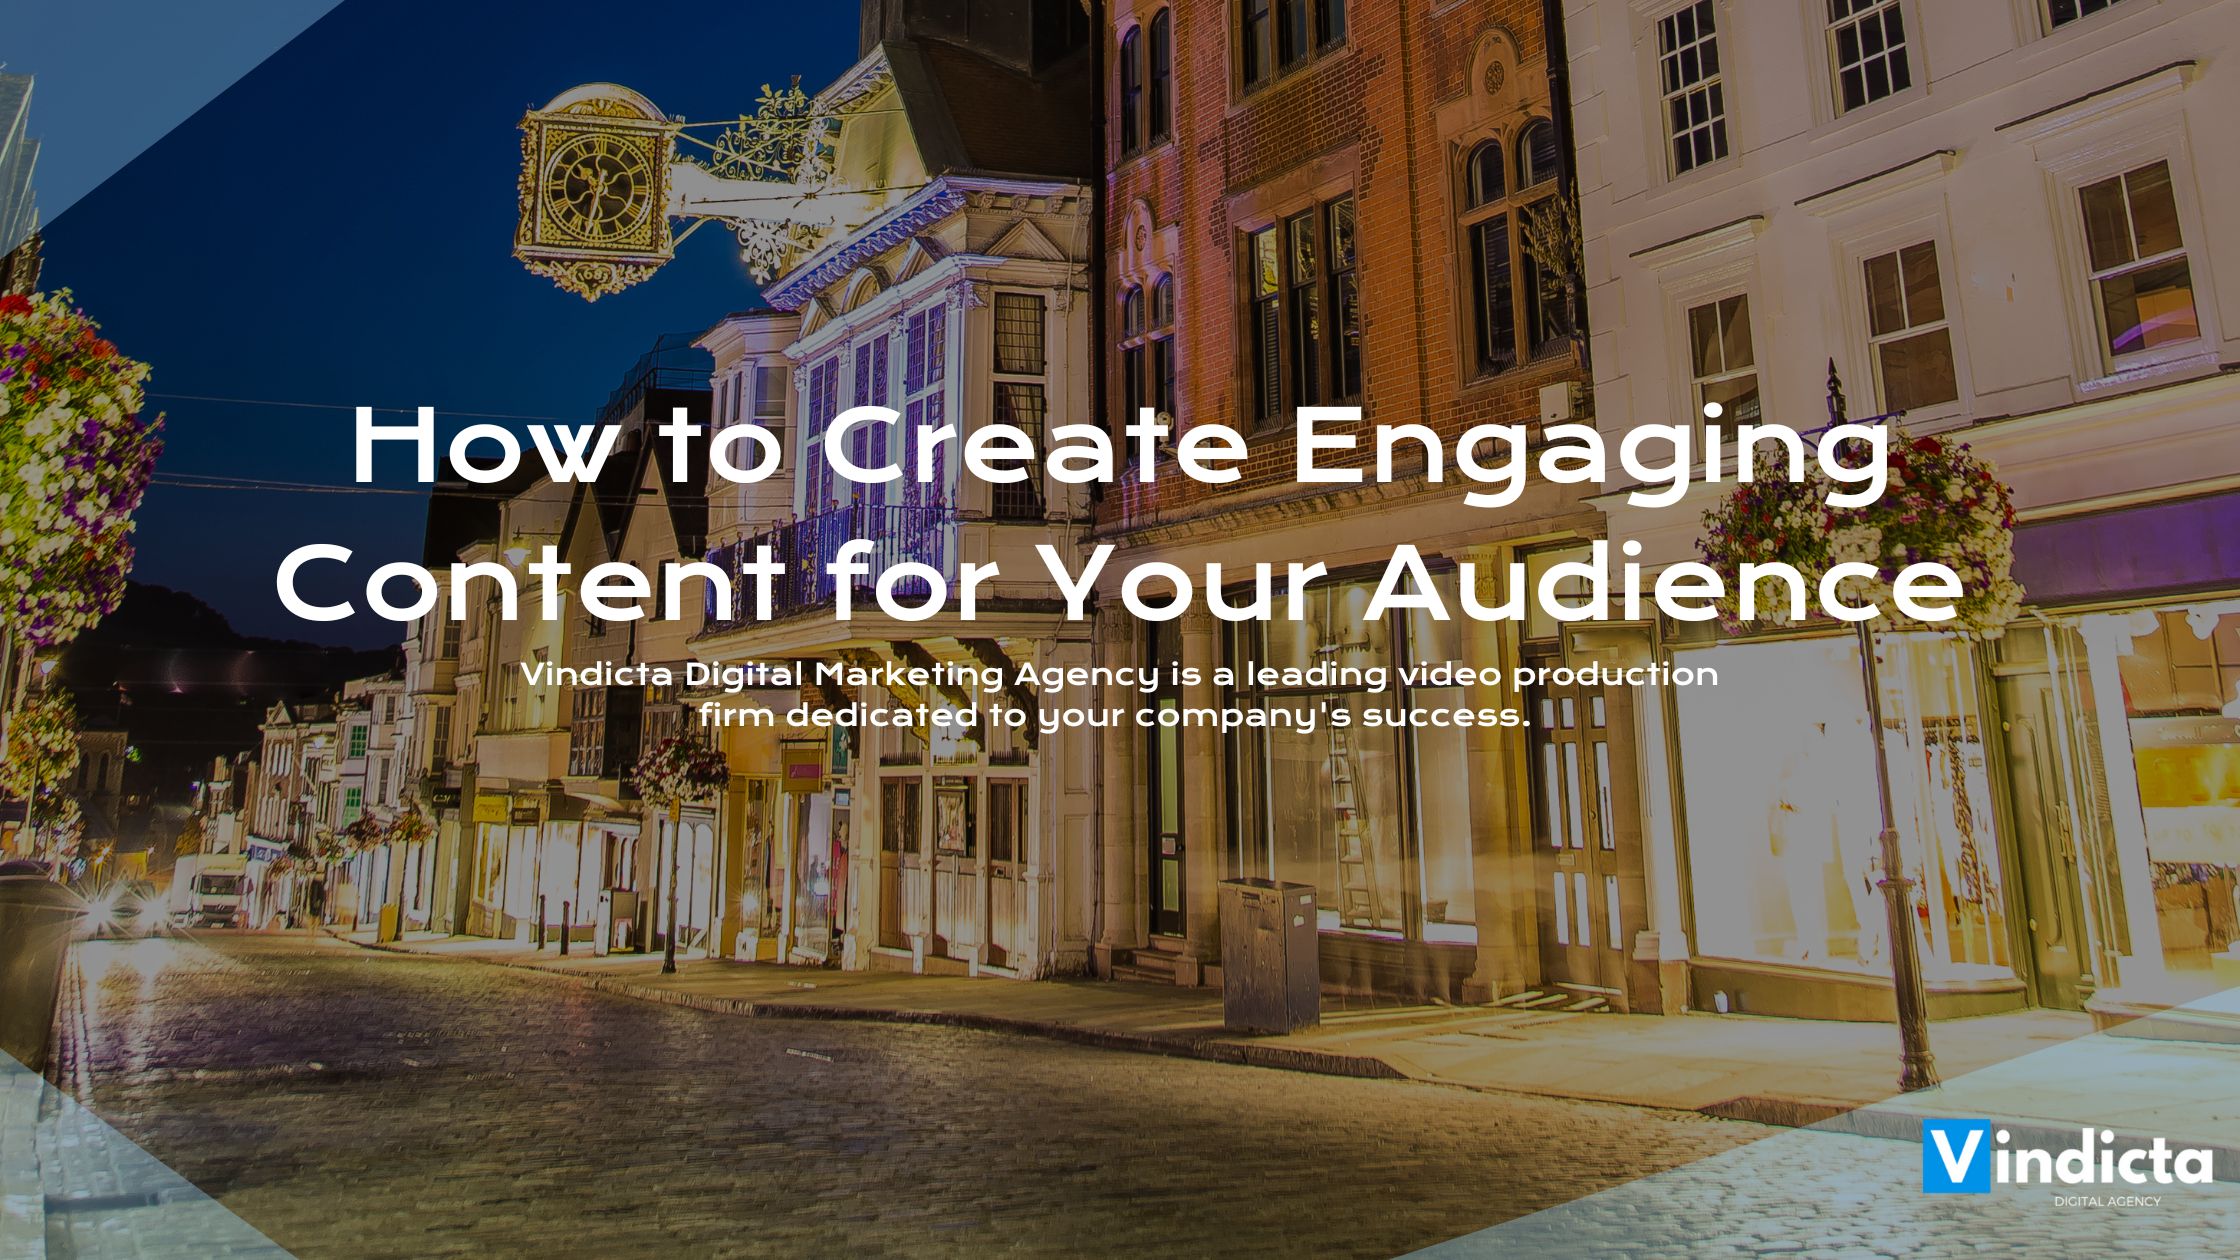 Surrey Video Production: How to Create Engaging Content for Your Audience